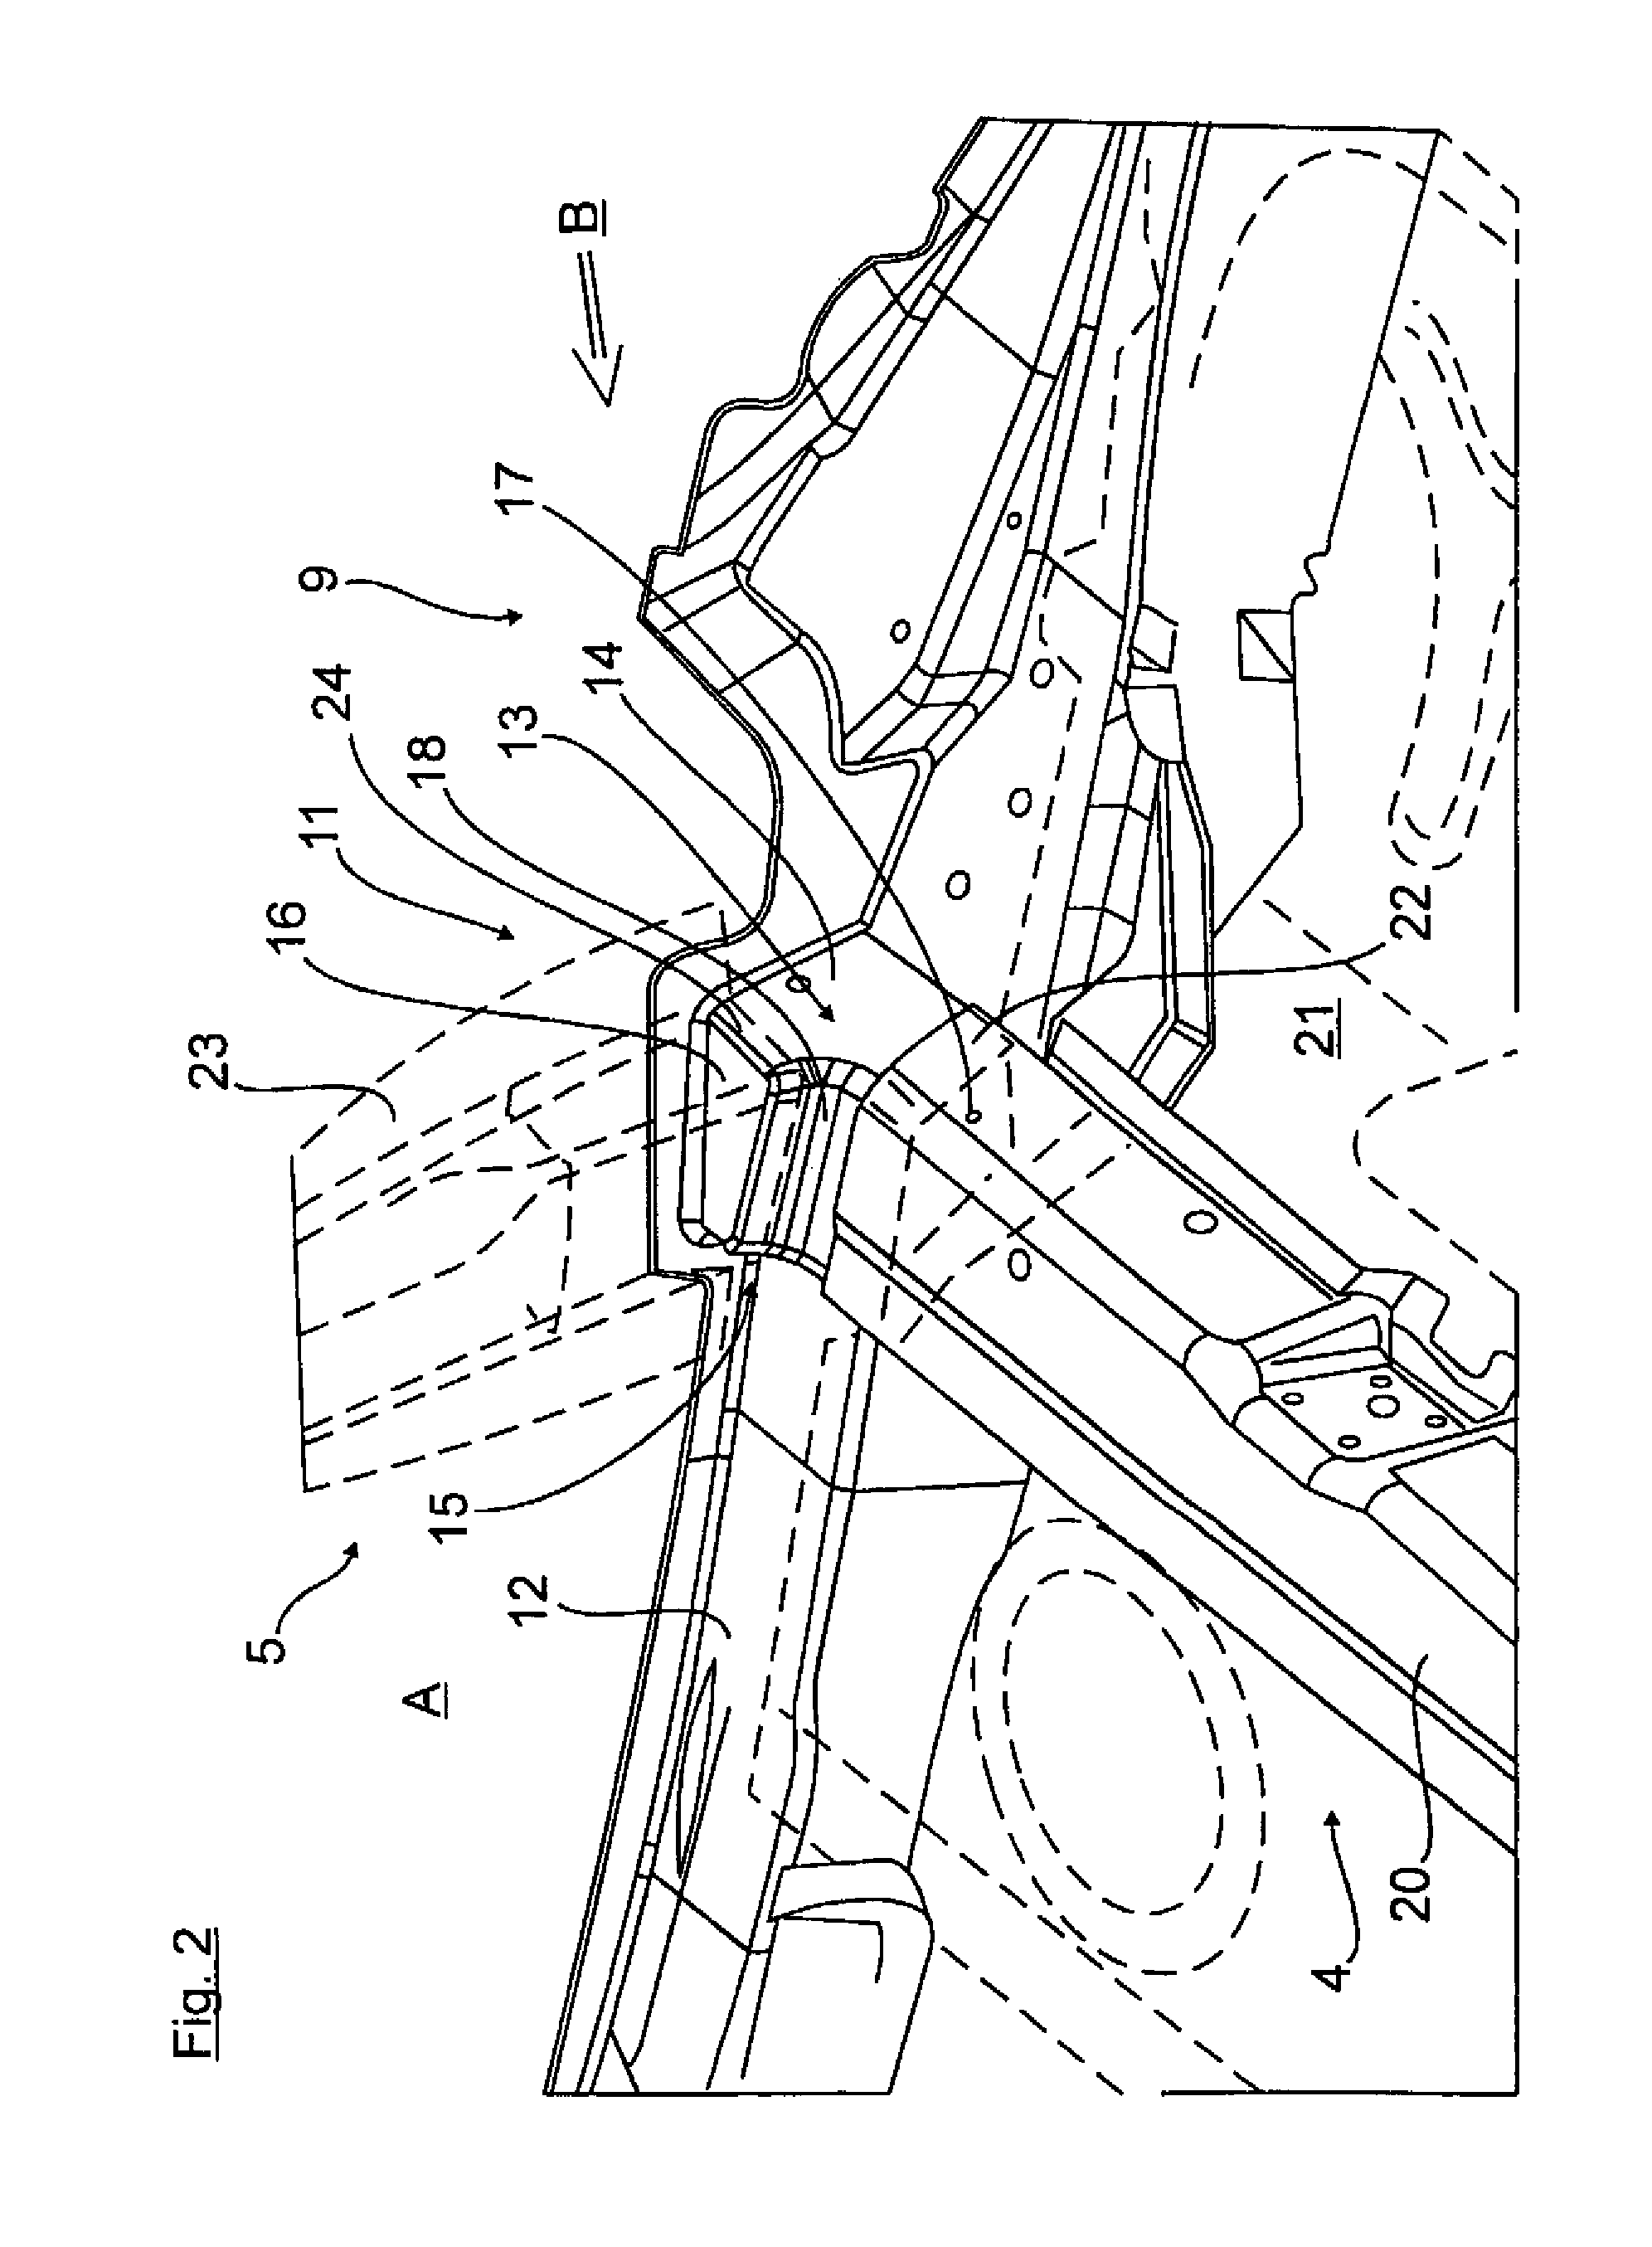 Vehicle body structure with body reinforcement behind the second row of seats